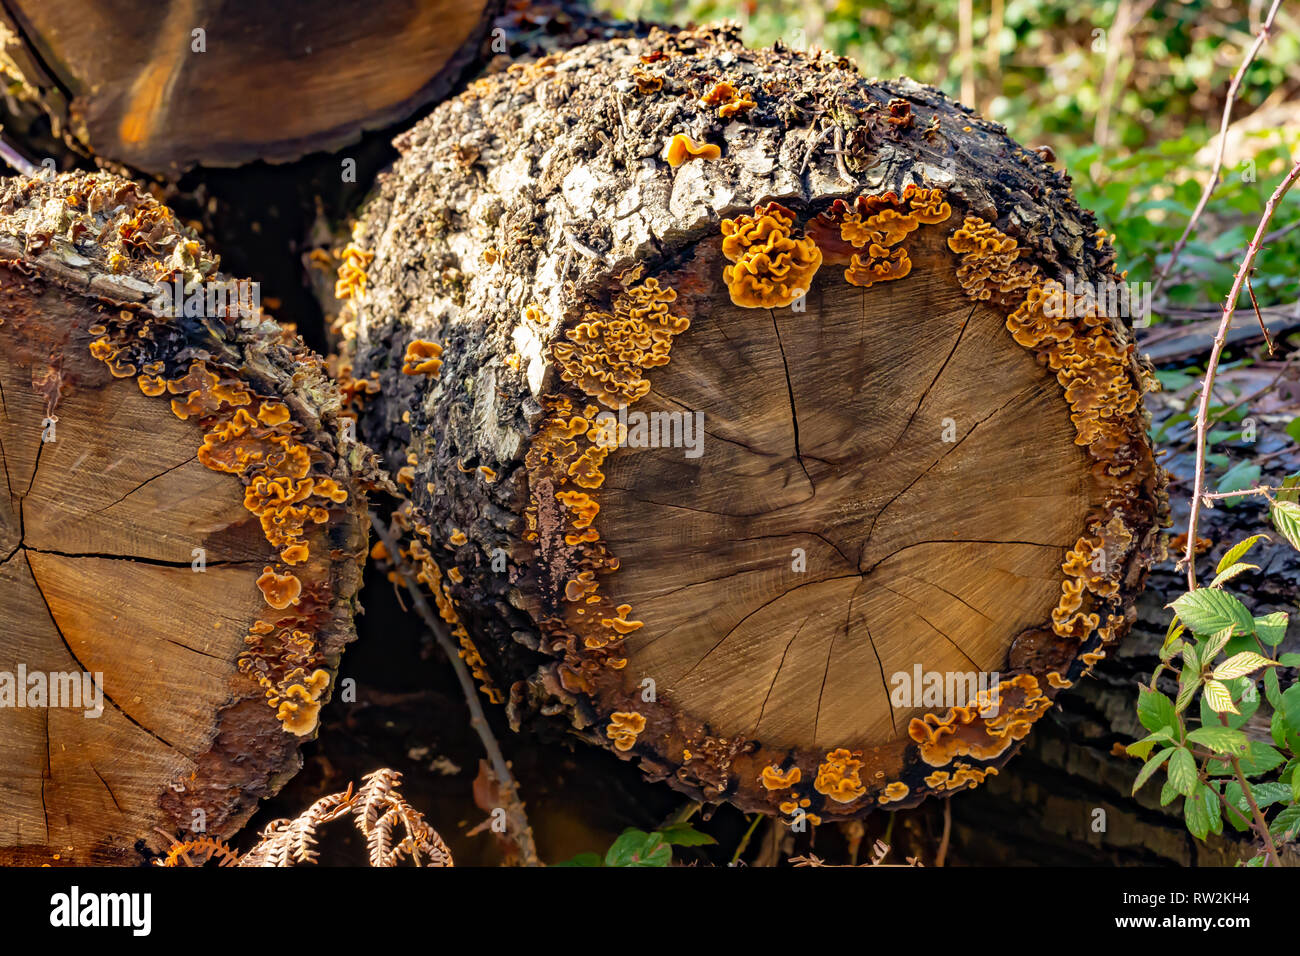 Hairy curtain crust growing on stacked lengths of cut logs, majority of fungus forming a perfect circle on sides. Stock Photo